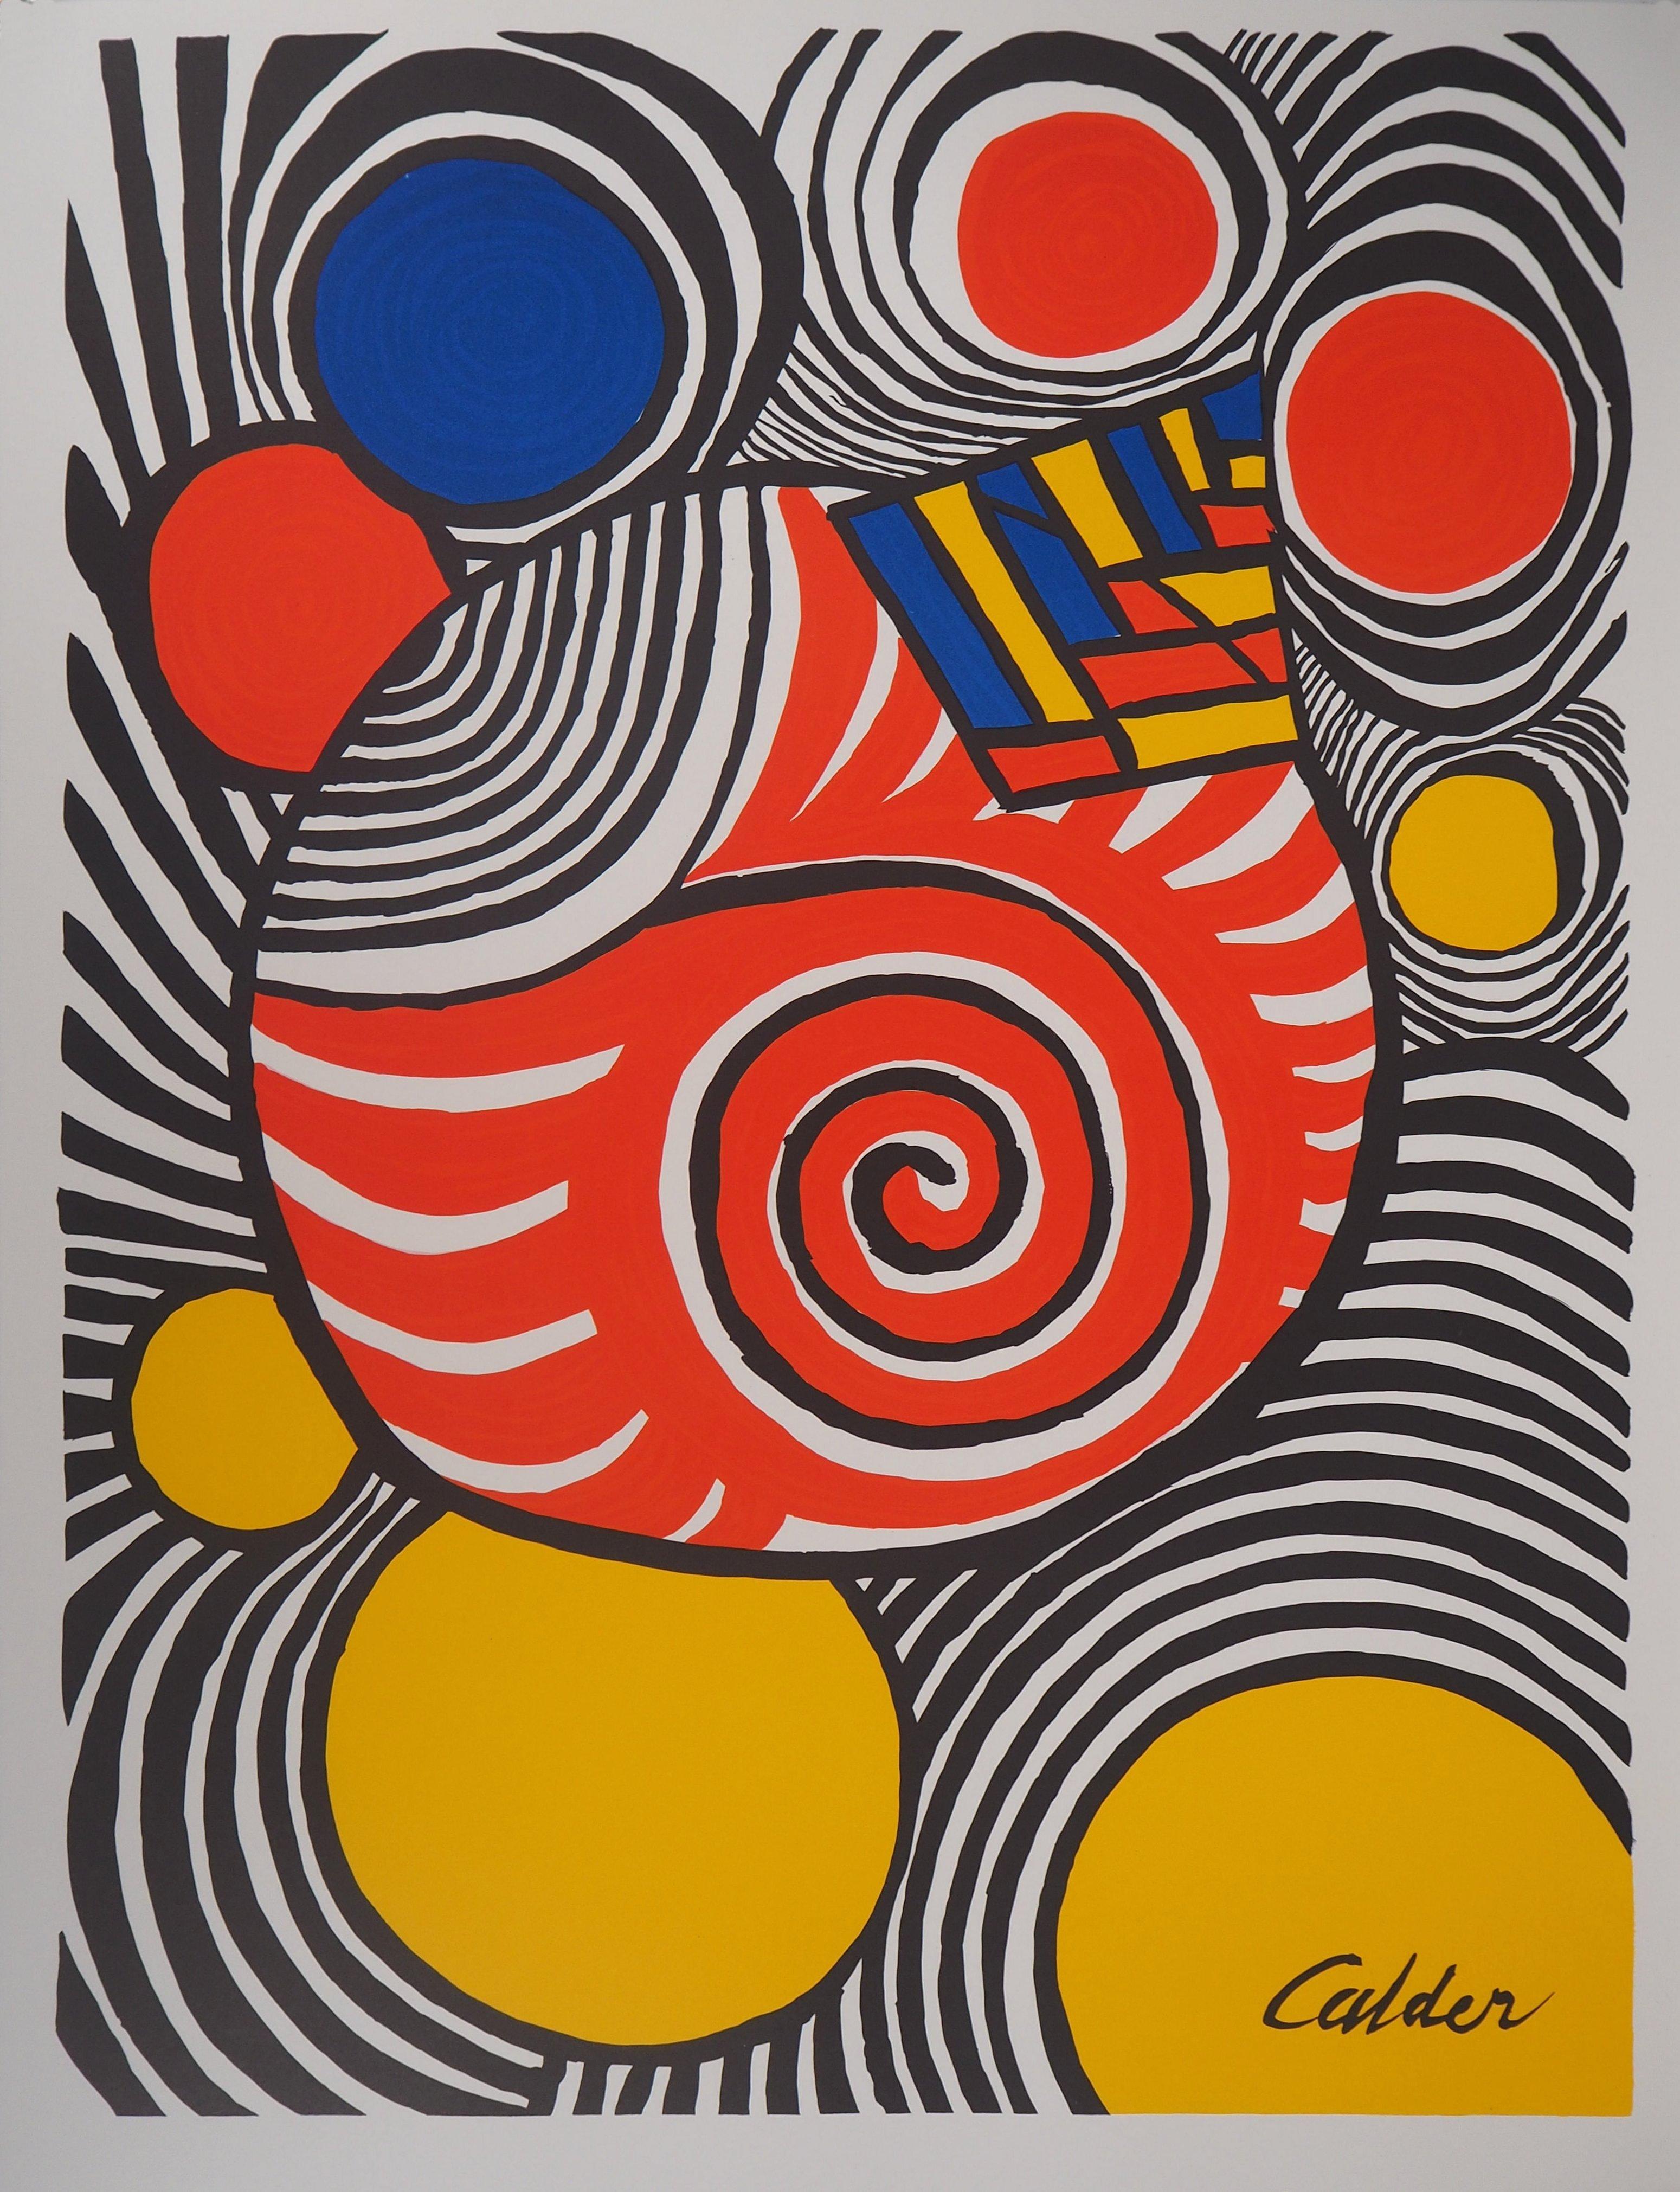 Les Travestis du Reel - Lithograph poster - 1979 - Abstract Geometric Print by Alexander Calder